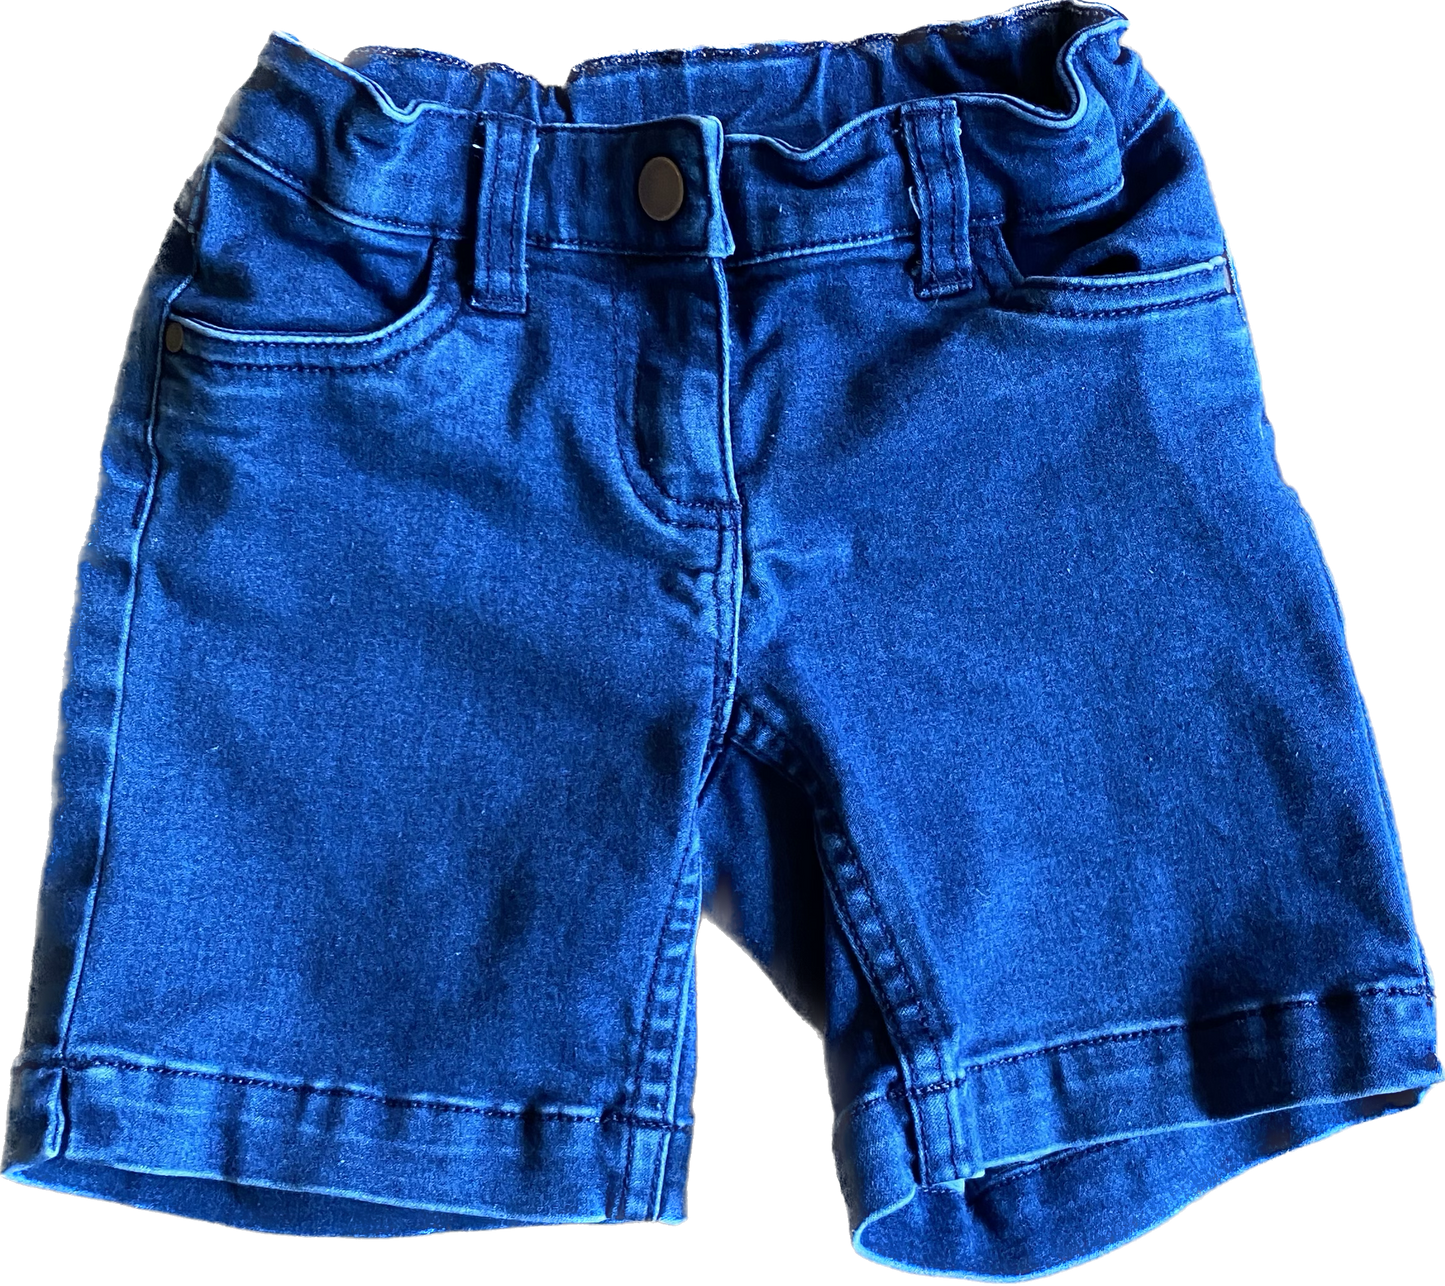 * REDUCED* Size 110 (5) Hanna Andersson denim shorts